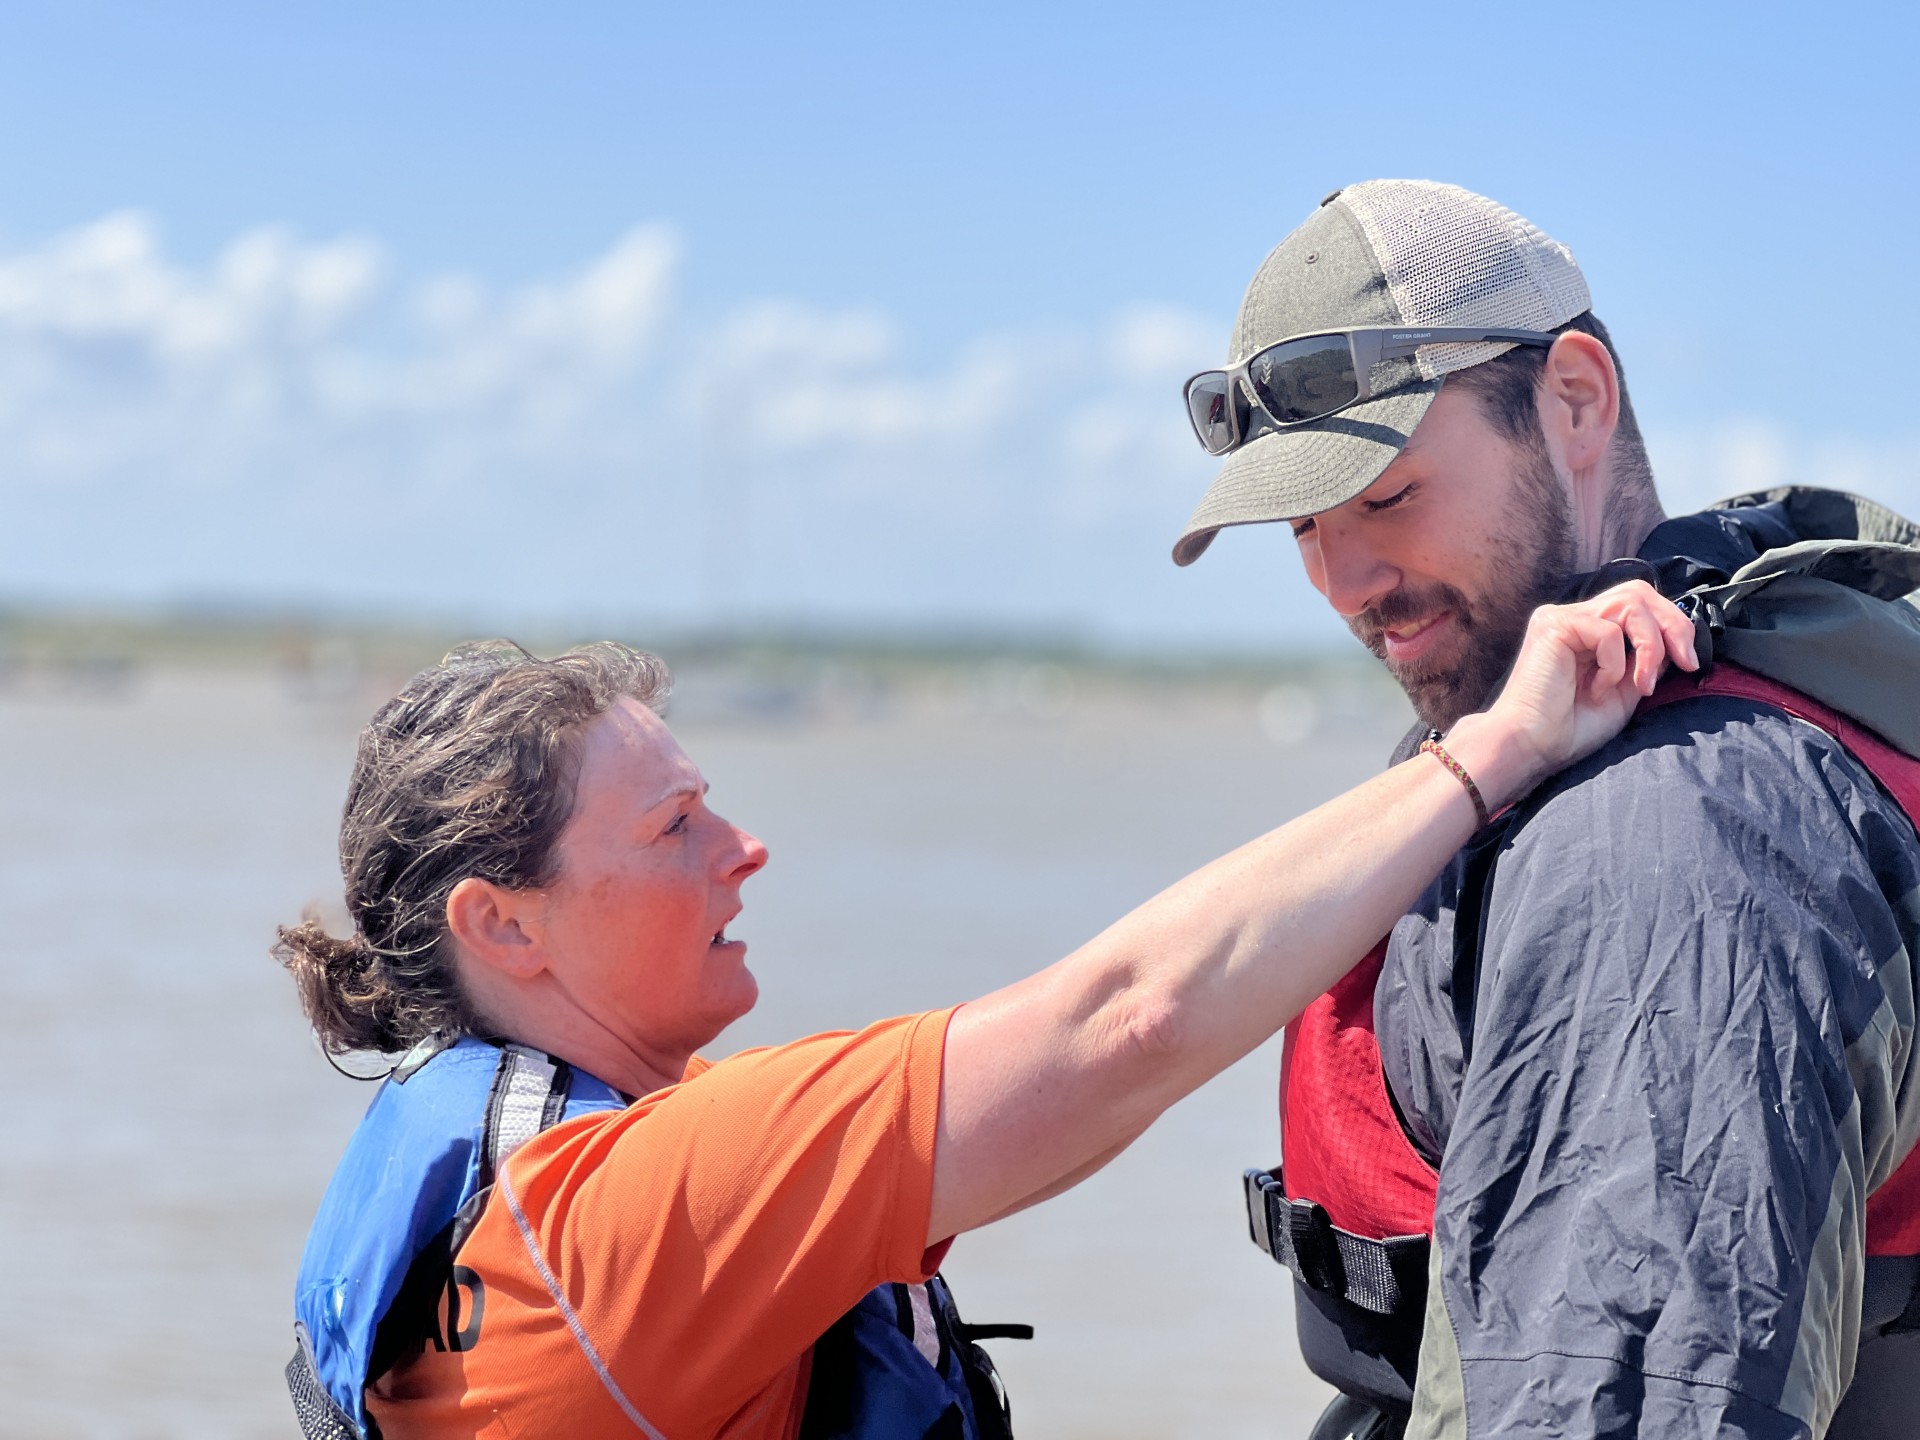 Guide adjusts a guests buoyancy aid before sea kayaking.